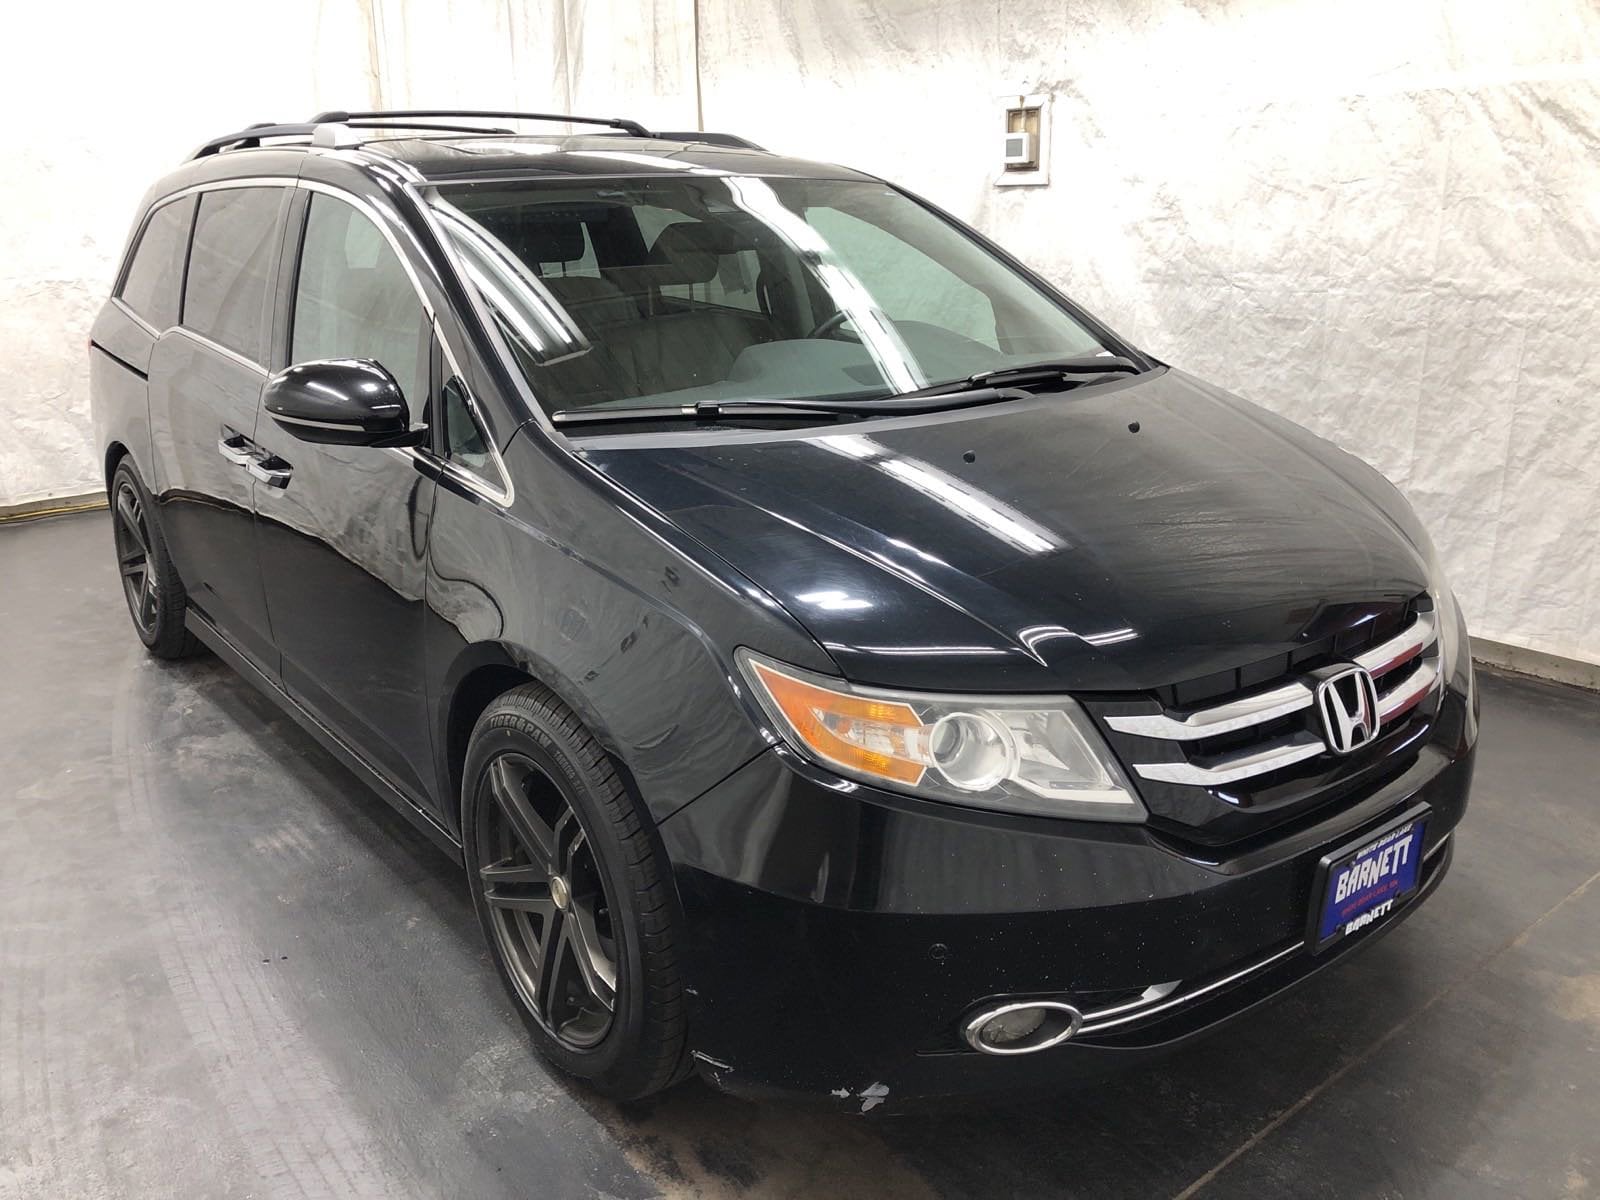 Used 2014 Honda Odyssey Touring Elite with VIN 5FNRL5H9XEB136479 for sale in White Bear Lake, Minnesota